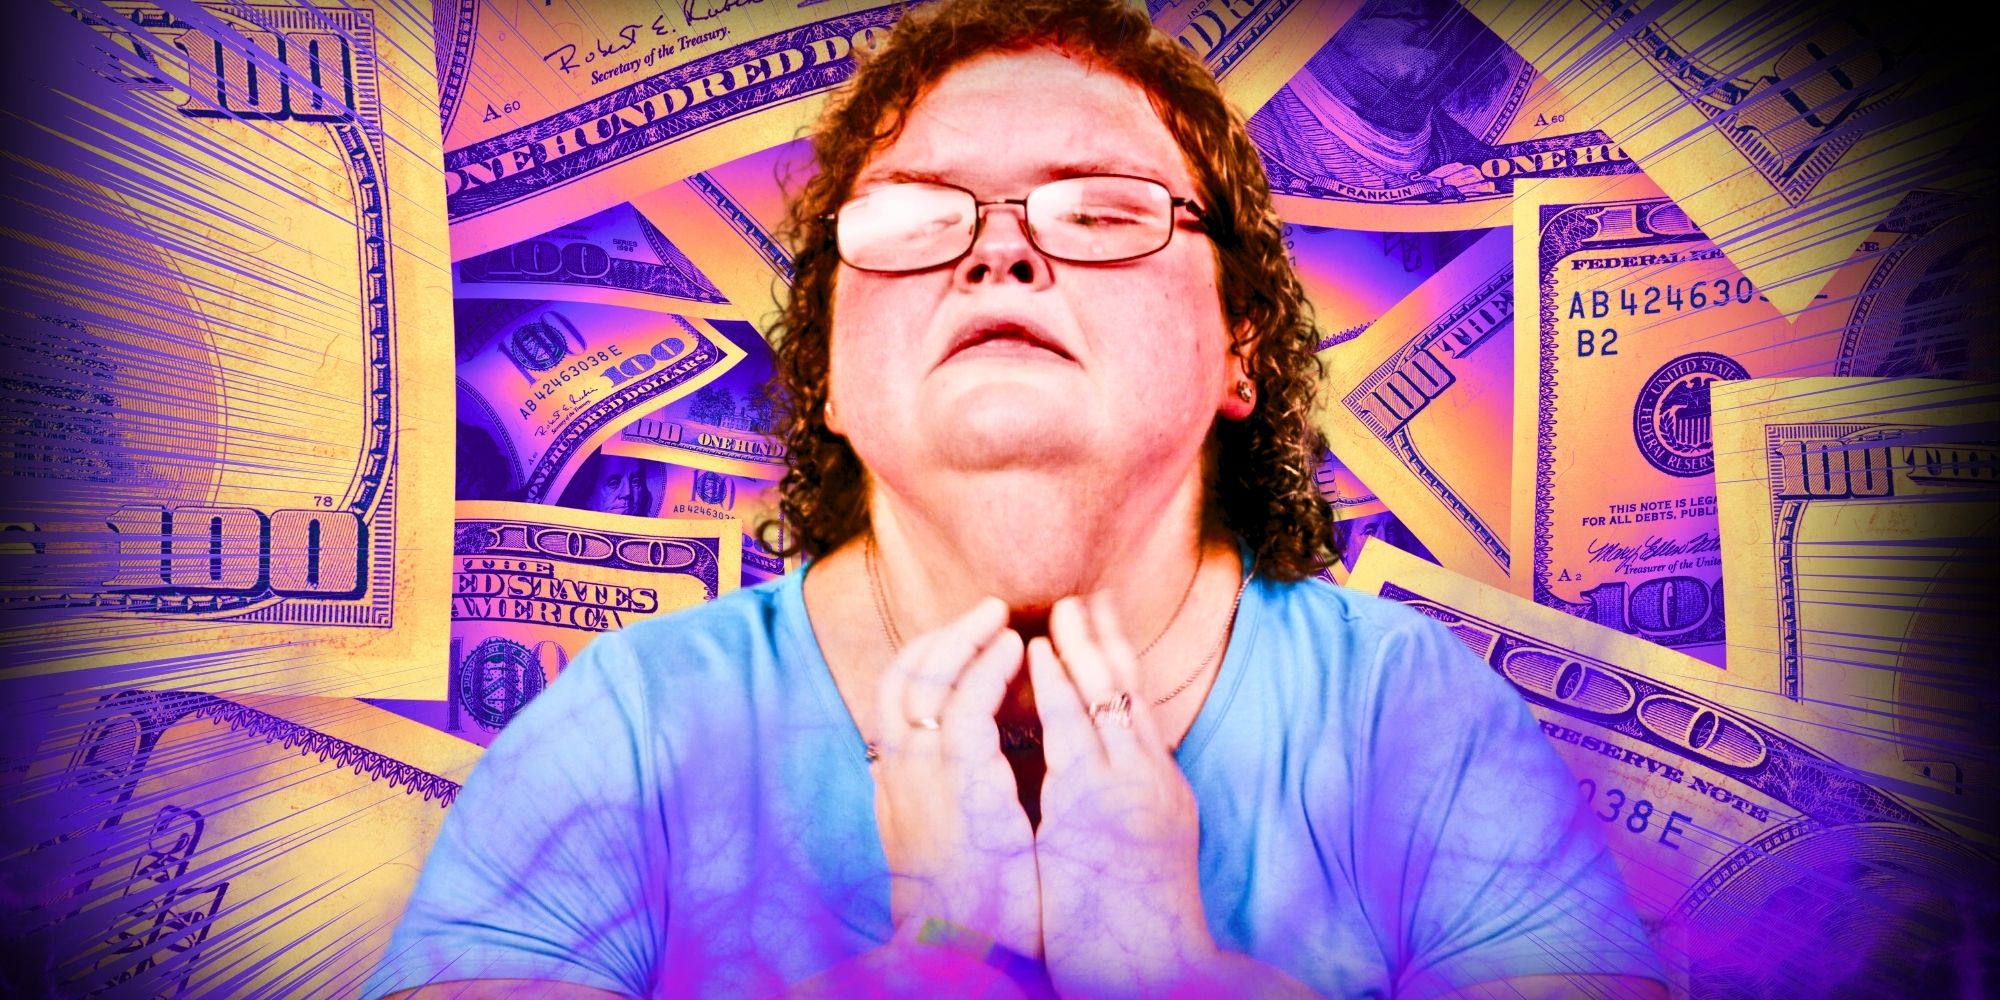 tammy slaton money montage 1000 lb sisters tammy looking upset with 100 dollar bills in the background